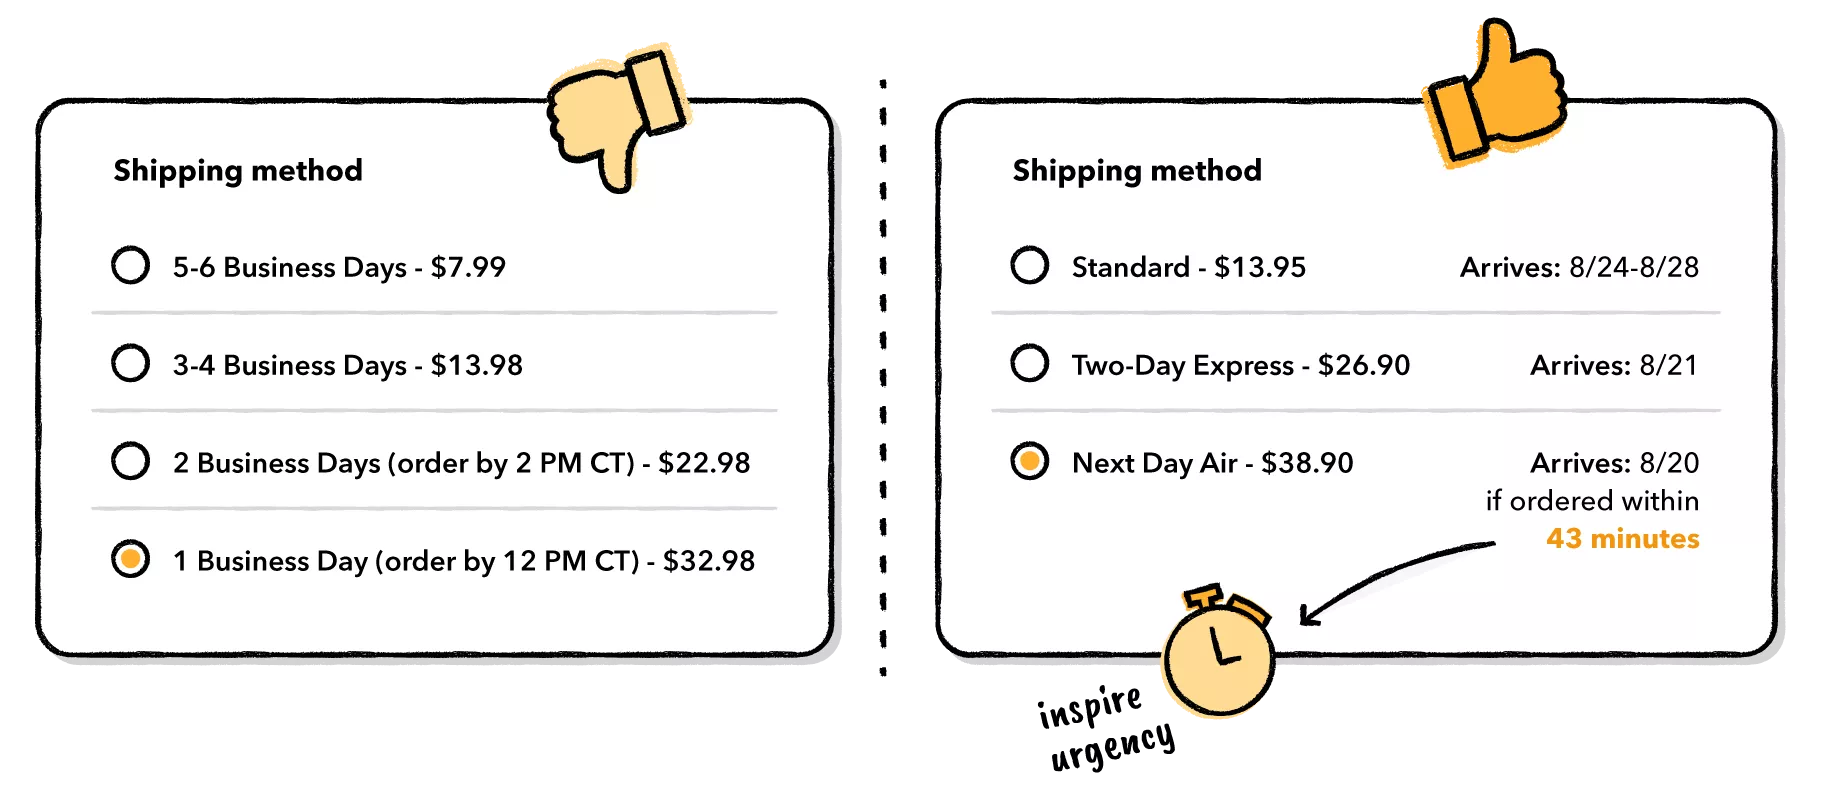 estimate delivery on date shipping options creates urgency